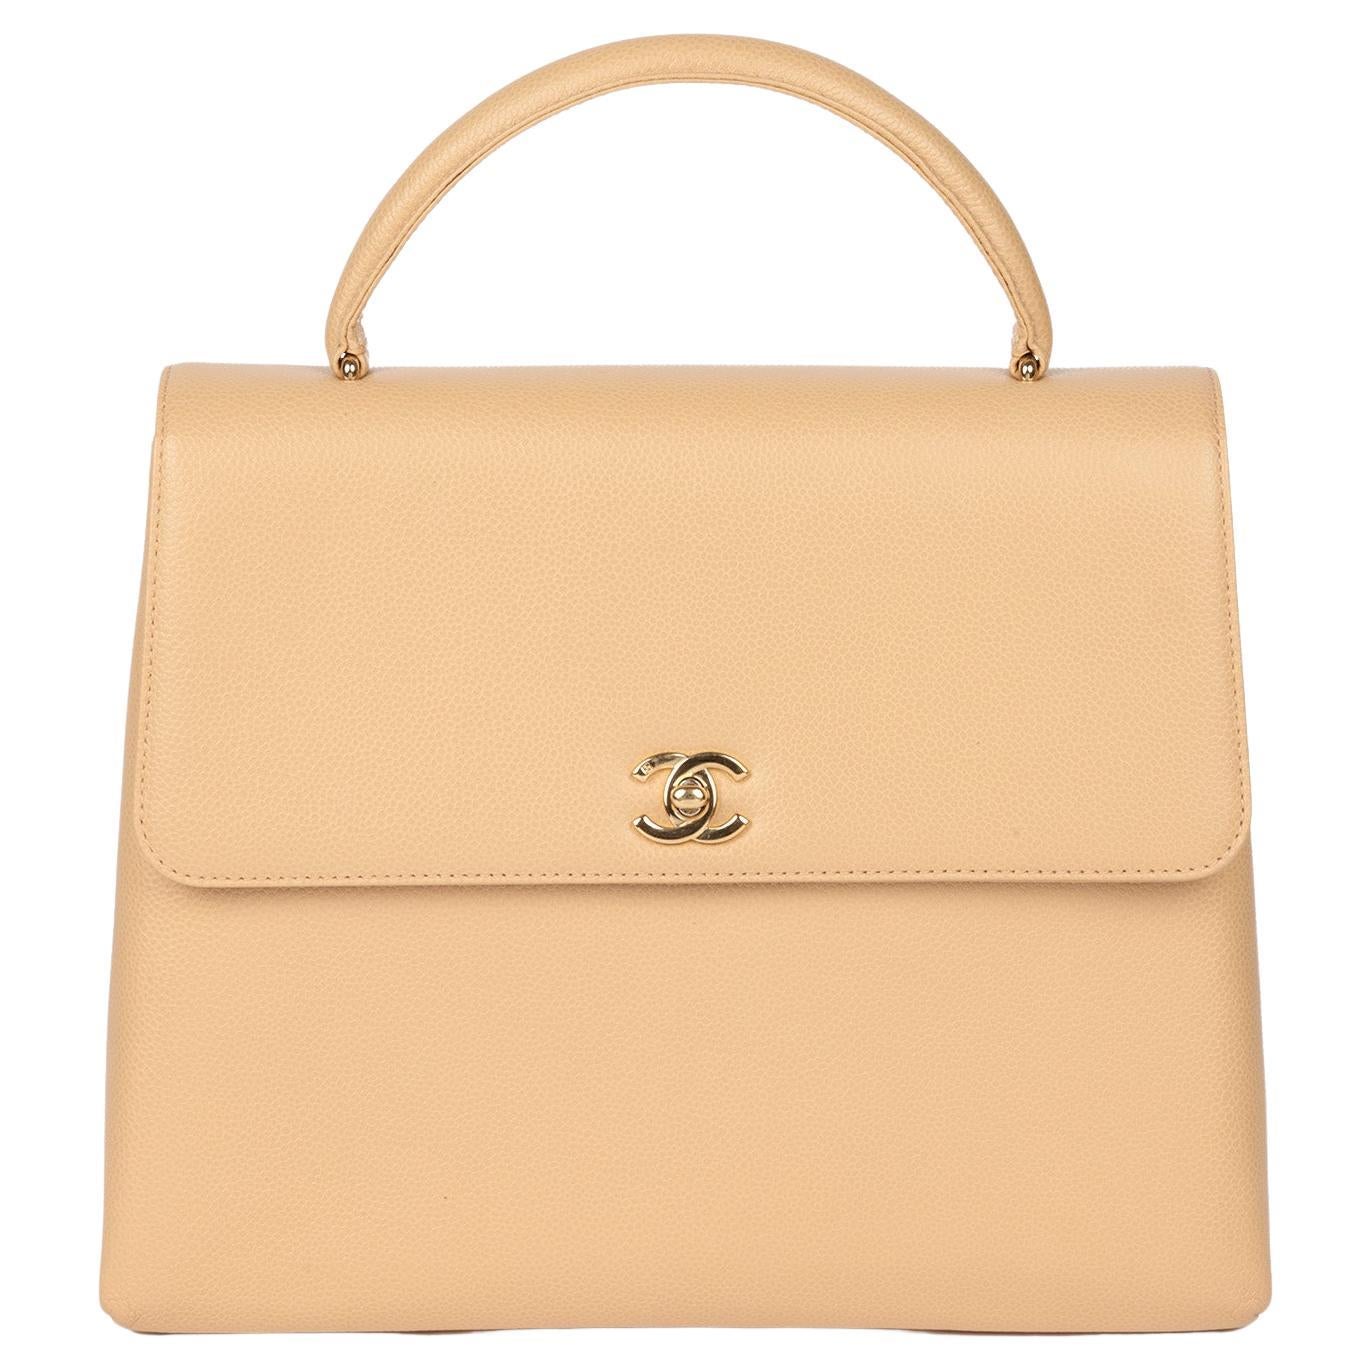 Chanel Beige Caviar Leather Vintage Classic Kelly For Sale